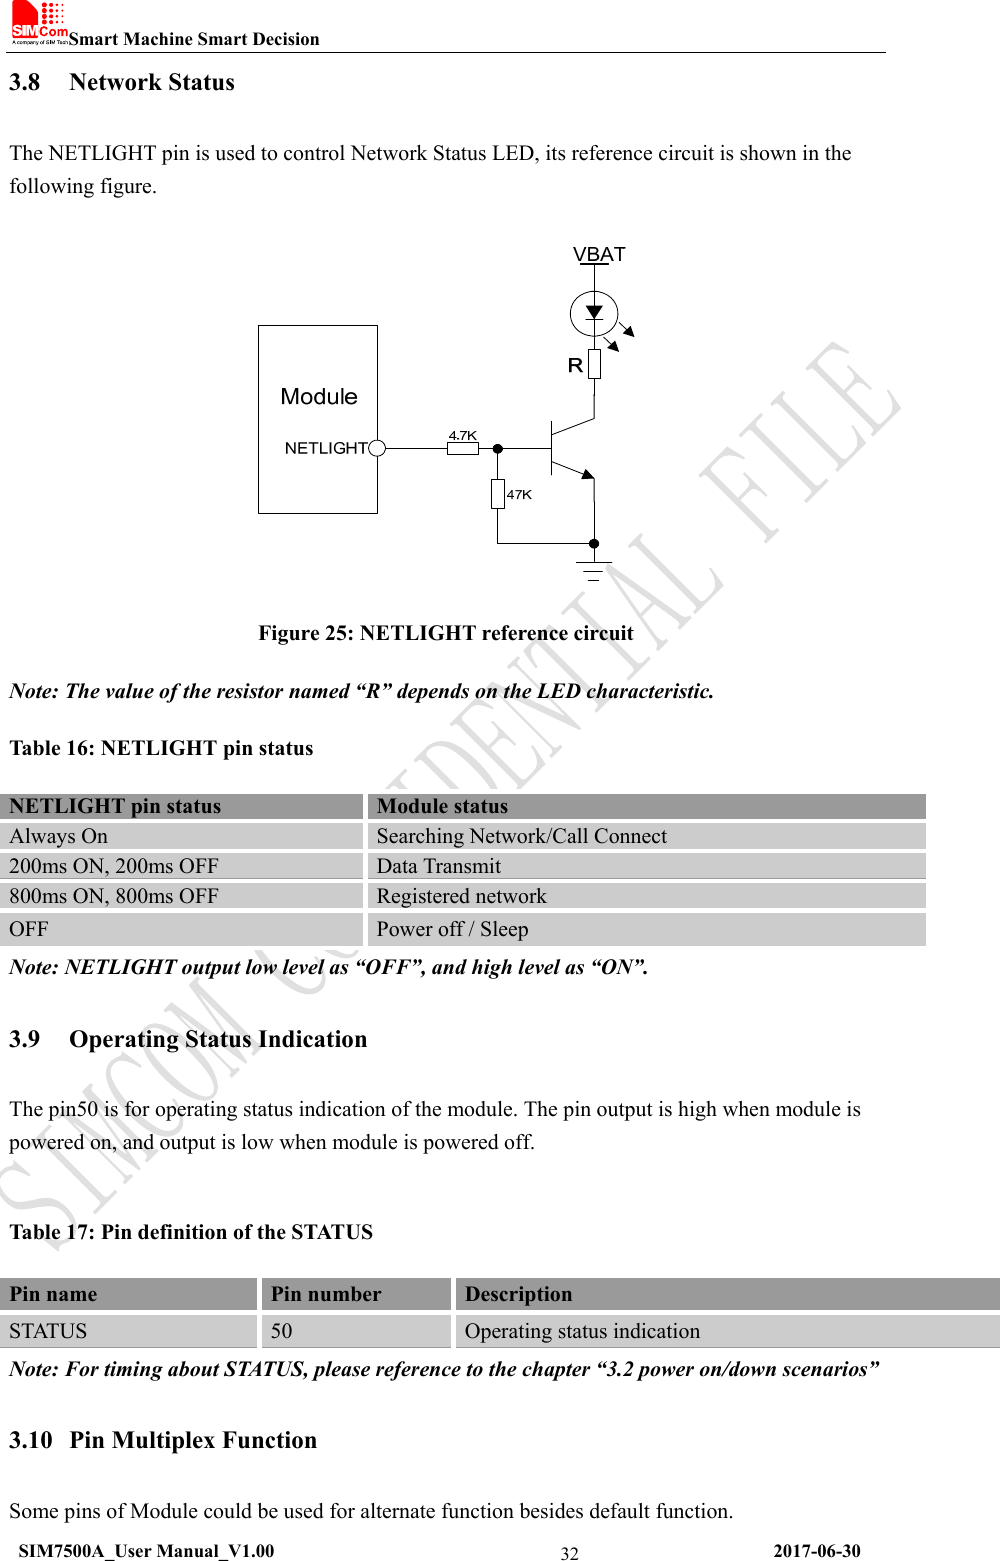 Smart Machine Smart Decision   SIM7500A_User Manual_V1.00                                                      2017-06-30 323.8 Network Status The NETLIGHT pin is used to control Network Status LED, its reference circuit is shown in the following figure.   Figure 25: NETLIGHT reference circuit Note: The value of the resistor named “R” depends on the LED characteristic. Table 16: NETLIGHT pin status NETLIGHT pin status    Module status Always On  Searching Network/Call Connect 200ms ON, 200ms OFF  Data Transmit 800ms ON, 800ms OFF  Registered network OFF  Power off / Sleep Note: NETLIGHT output low level as “OFF”, and high level as “ON”. 3.9 Operating Status Indication The pin50 is for operating status indication of the module. The pin output is high when module is powered on, and output is low when module is powered off.  Table 17: Pin definition of the STATUS Pin name  Pin number  Description STATUS  50  Operating status indication Note: For timing about STATUS, please reference to the chapter “3.2 power on/down scenarios” 3.10 Pin Multiplex Function Some pins of Module could be used for alternate function besides default function. 